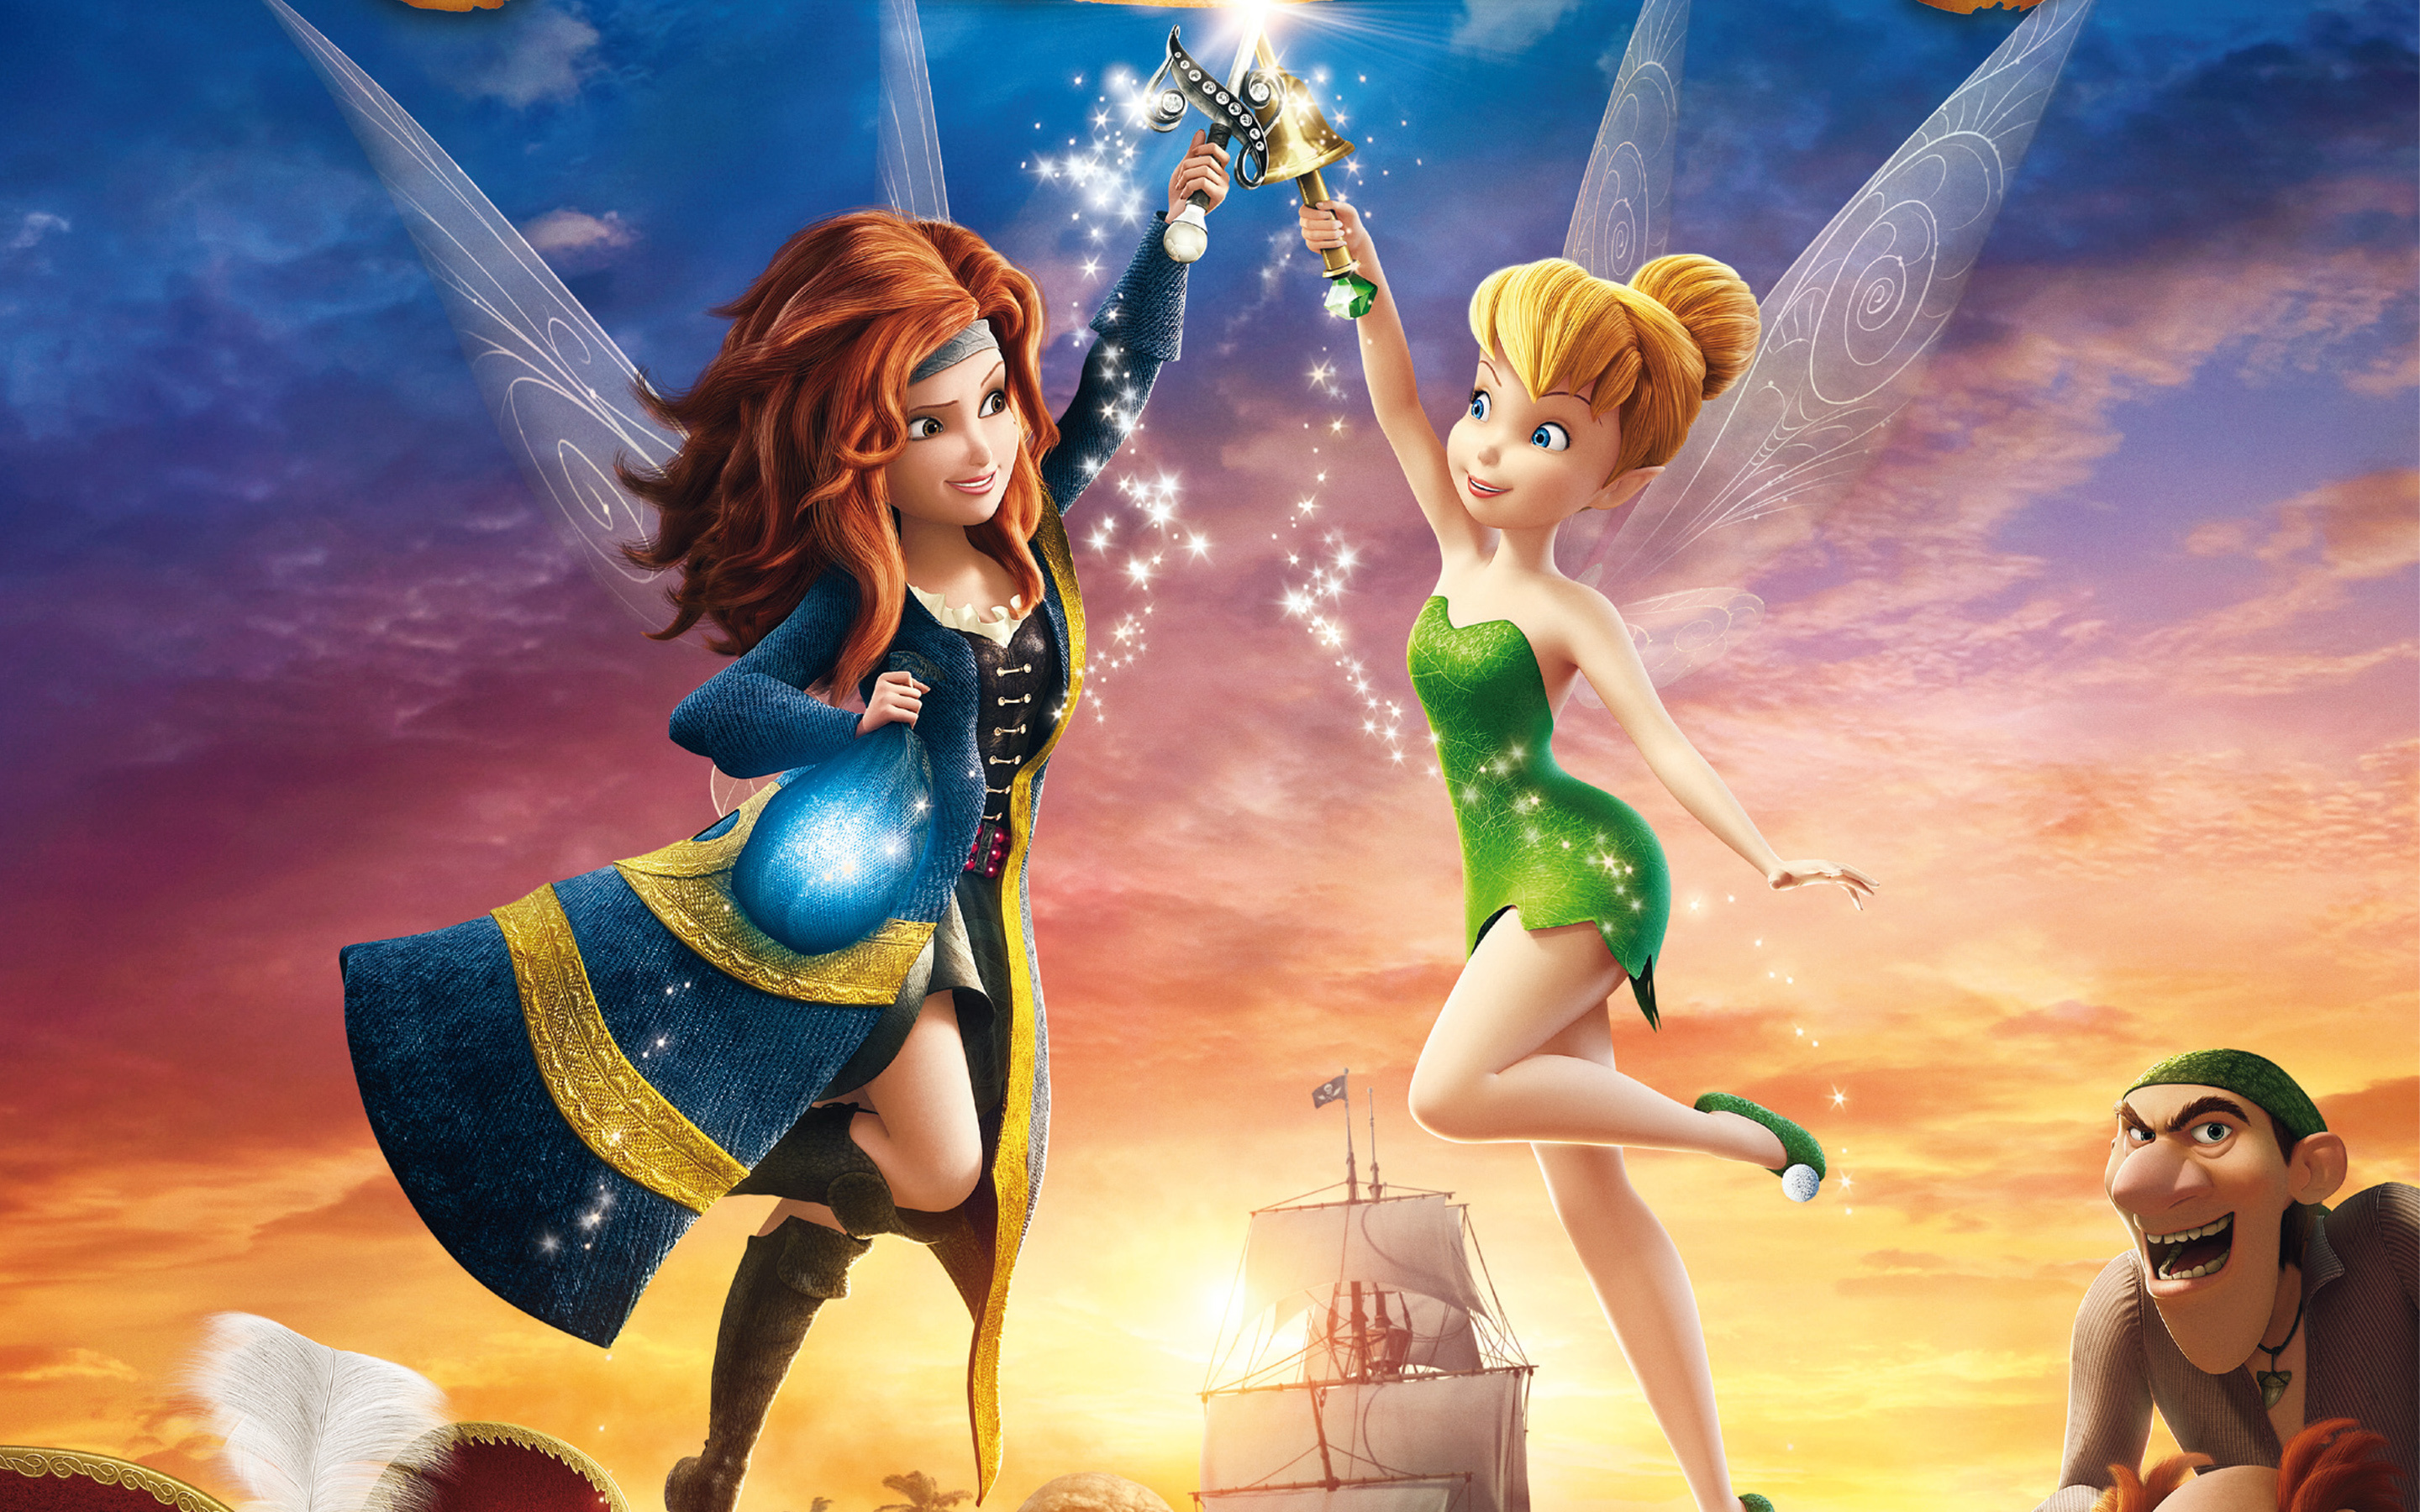 The Pirate Fairy wallpapers, Tinker Bell movie, Animated adventure, Fairyland fantasy, 2880x1800 HD Desktop